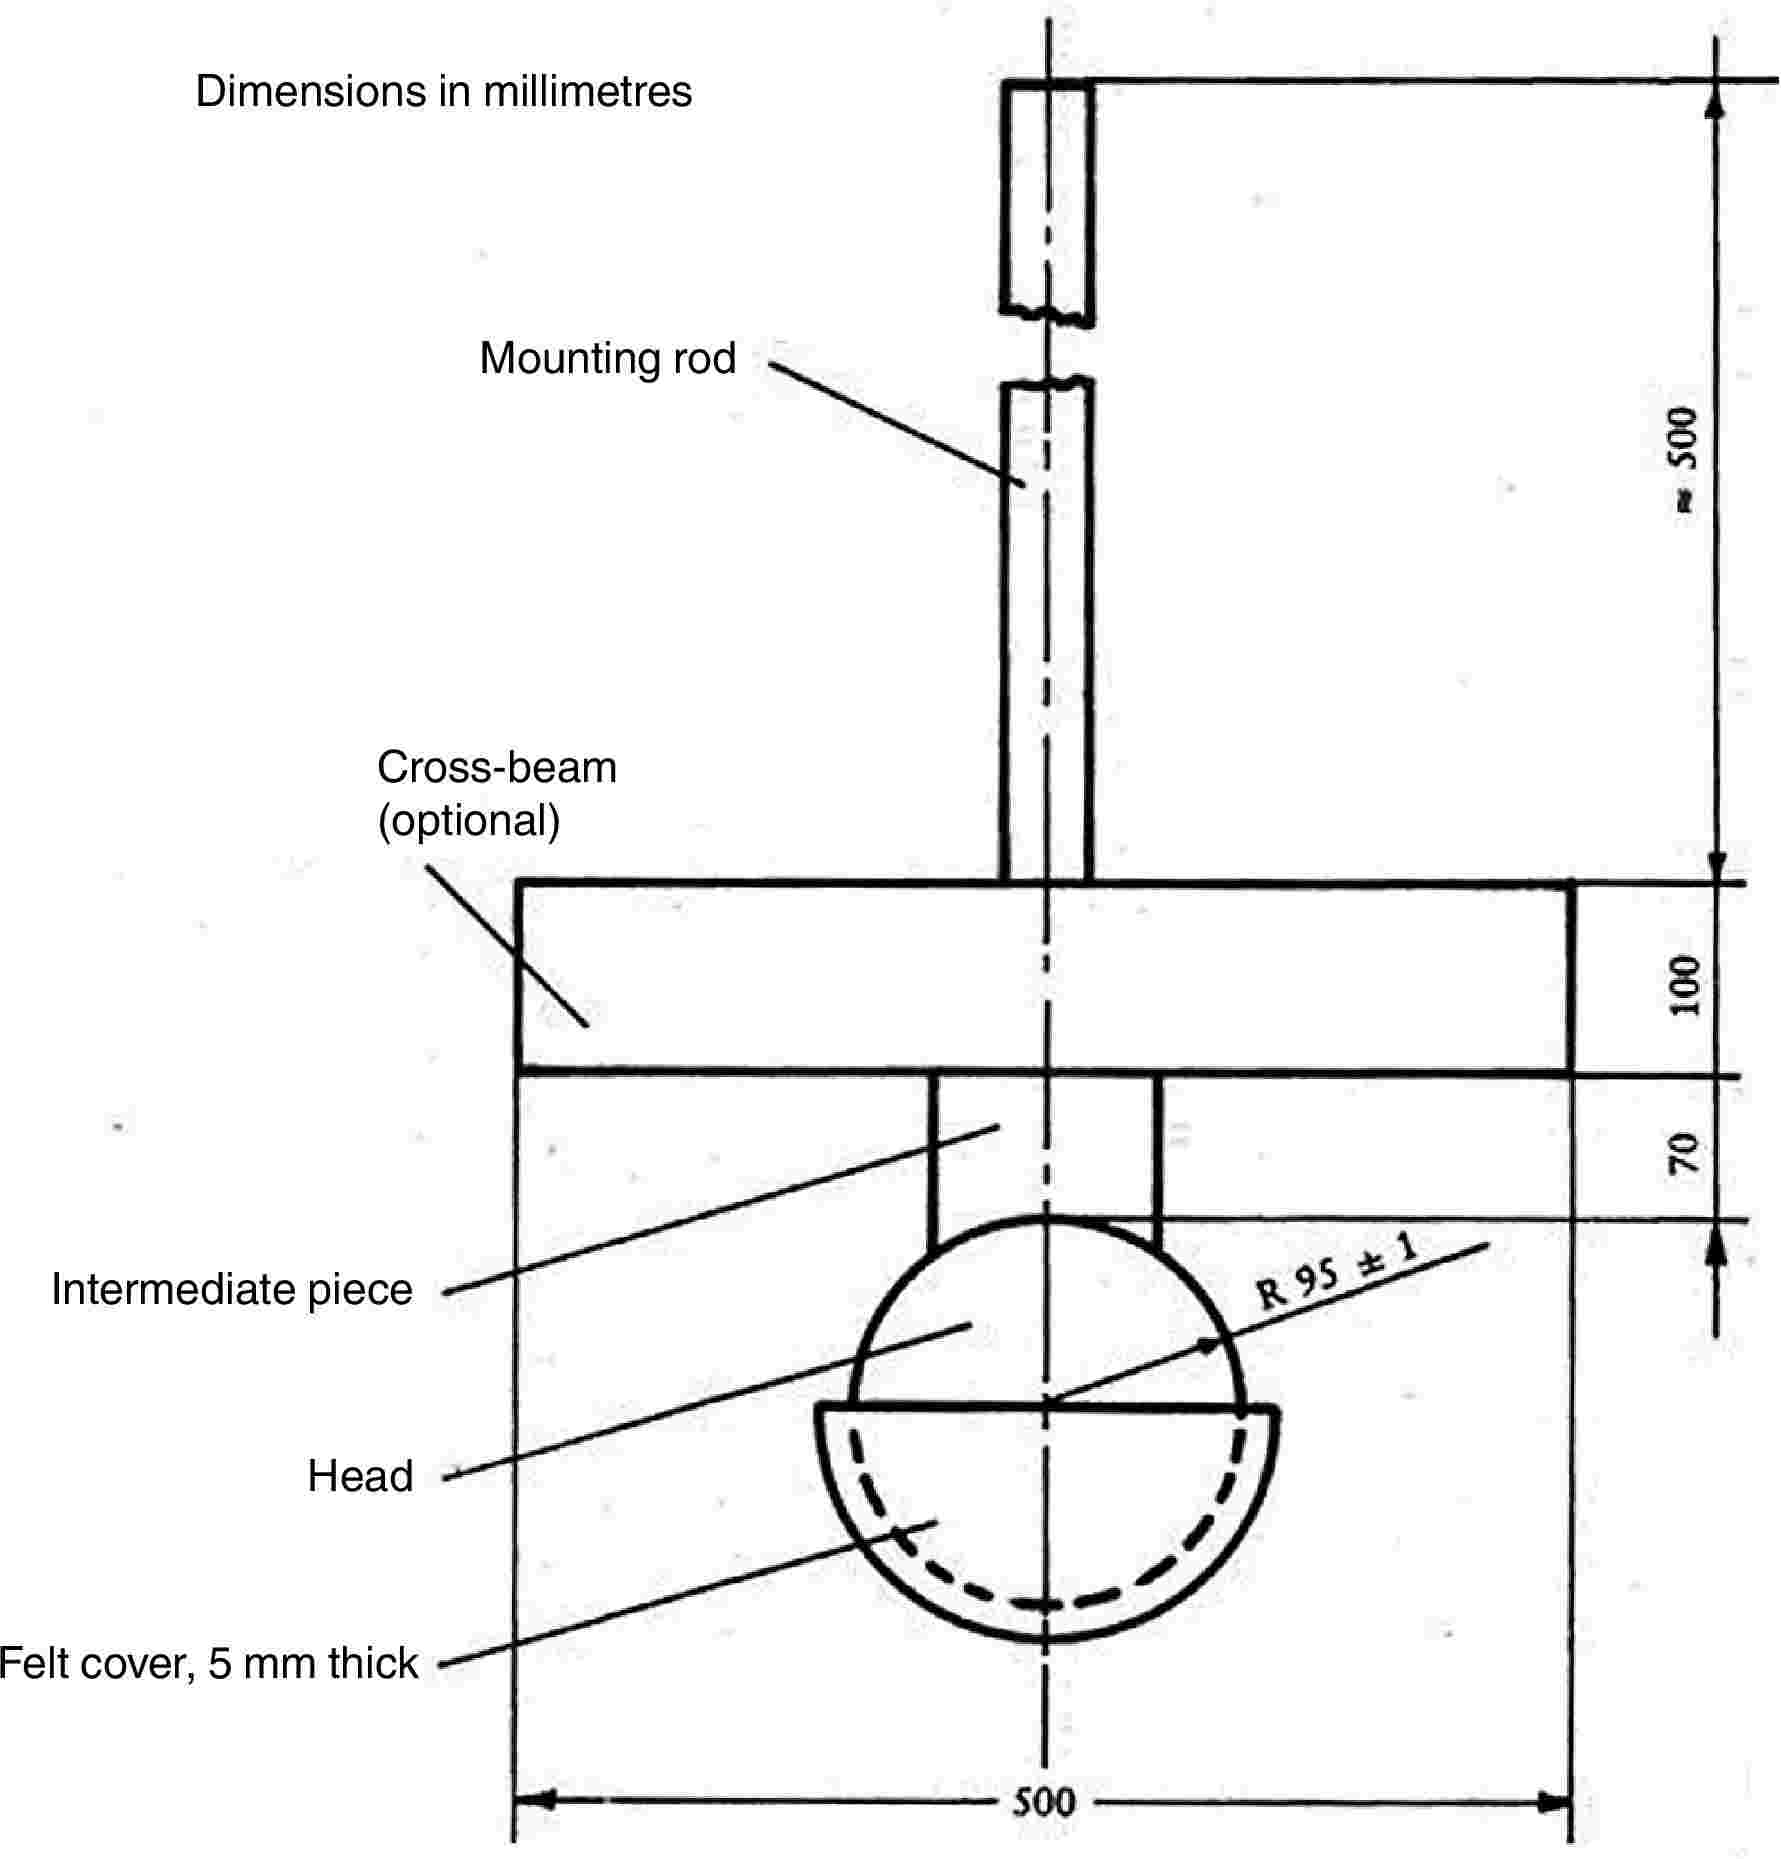 Dimensions in millimetresMounting rodCross-beam (optional)Intermediate pieceHeadFelt cover, 5 mm thick